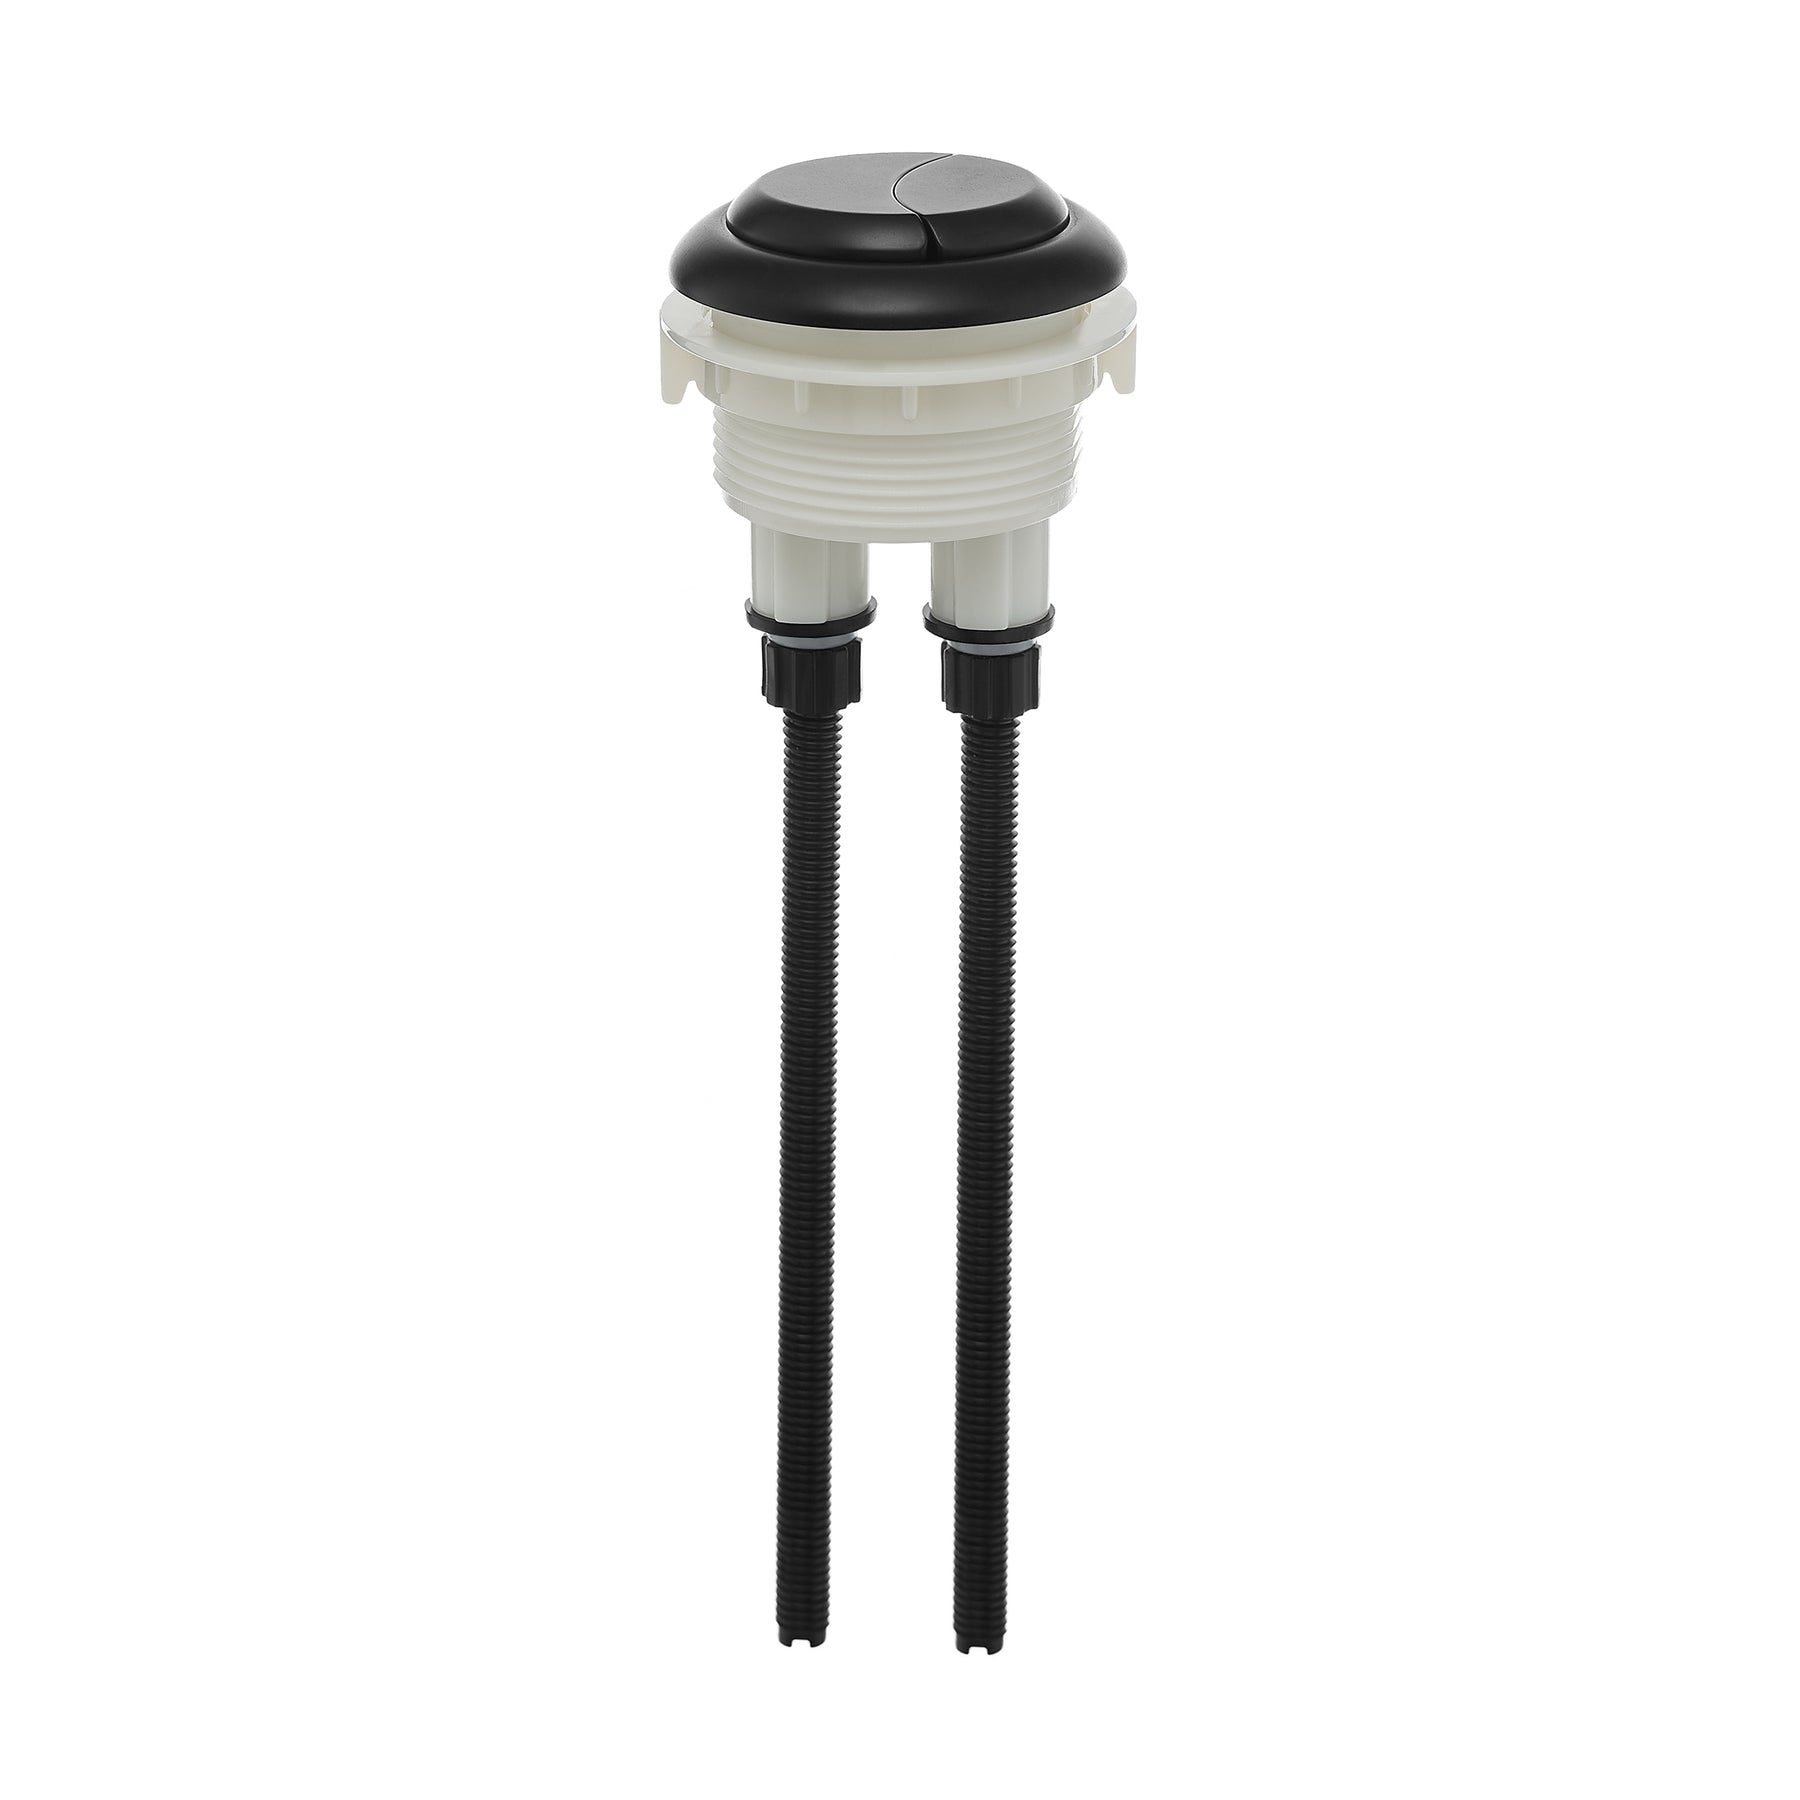 Swiss Madison Toilet Hardware (Compatible with SM-1T112, SM-1T127) - SM-CH02